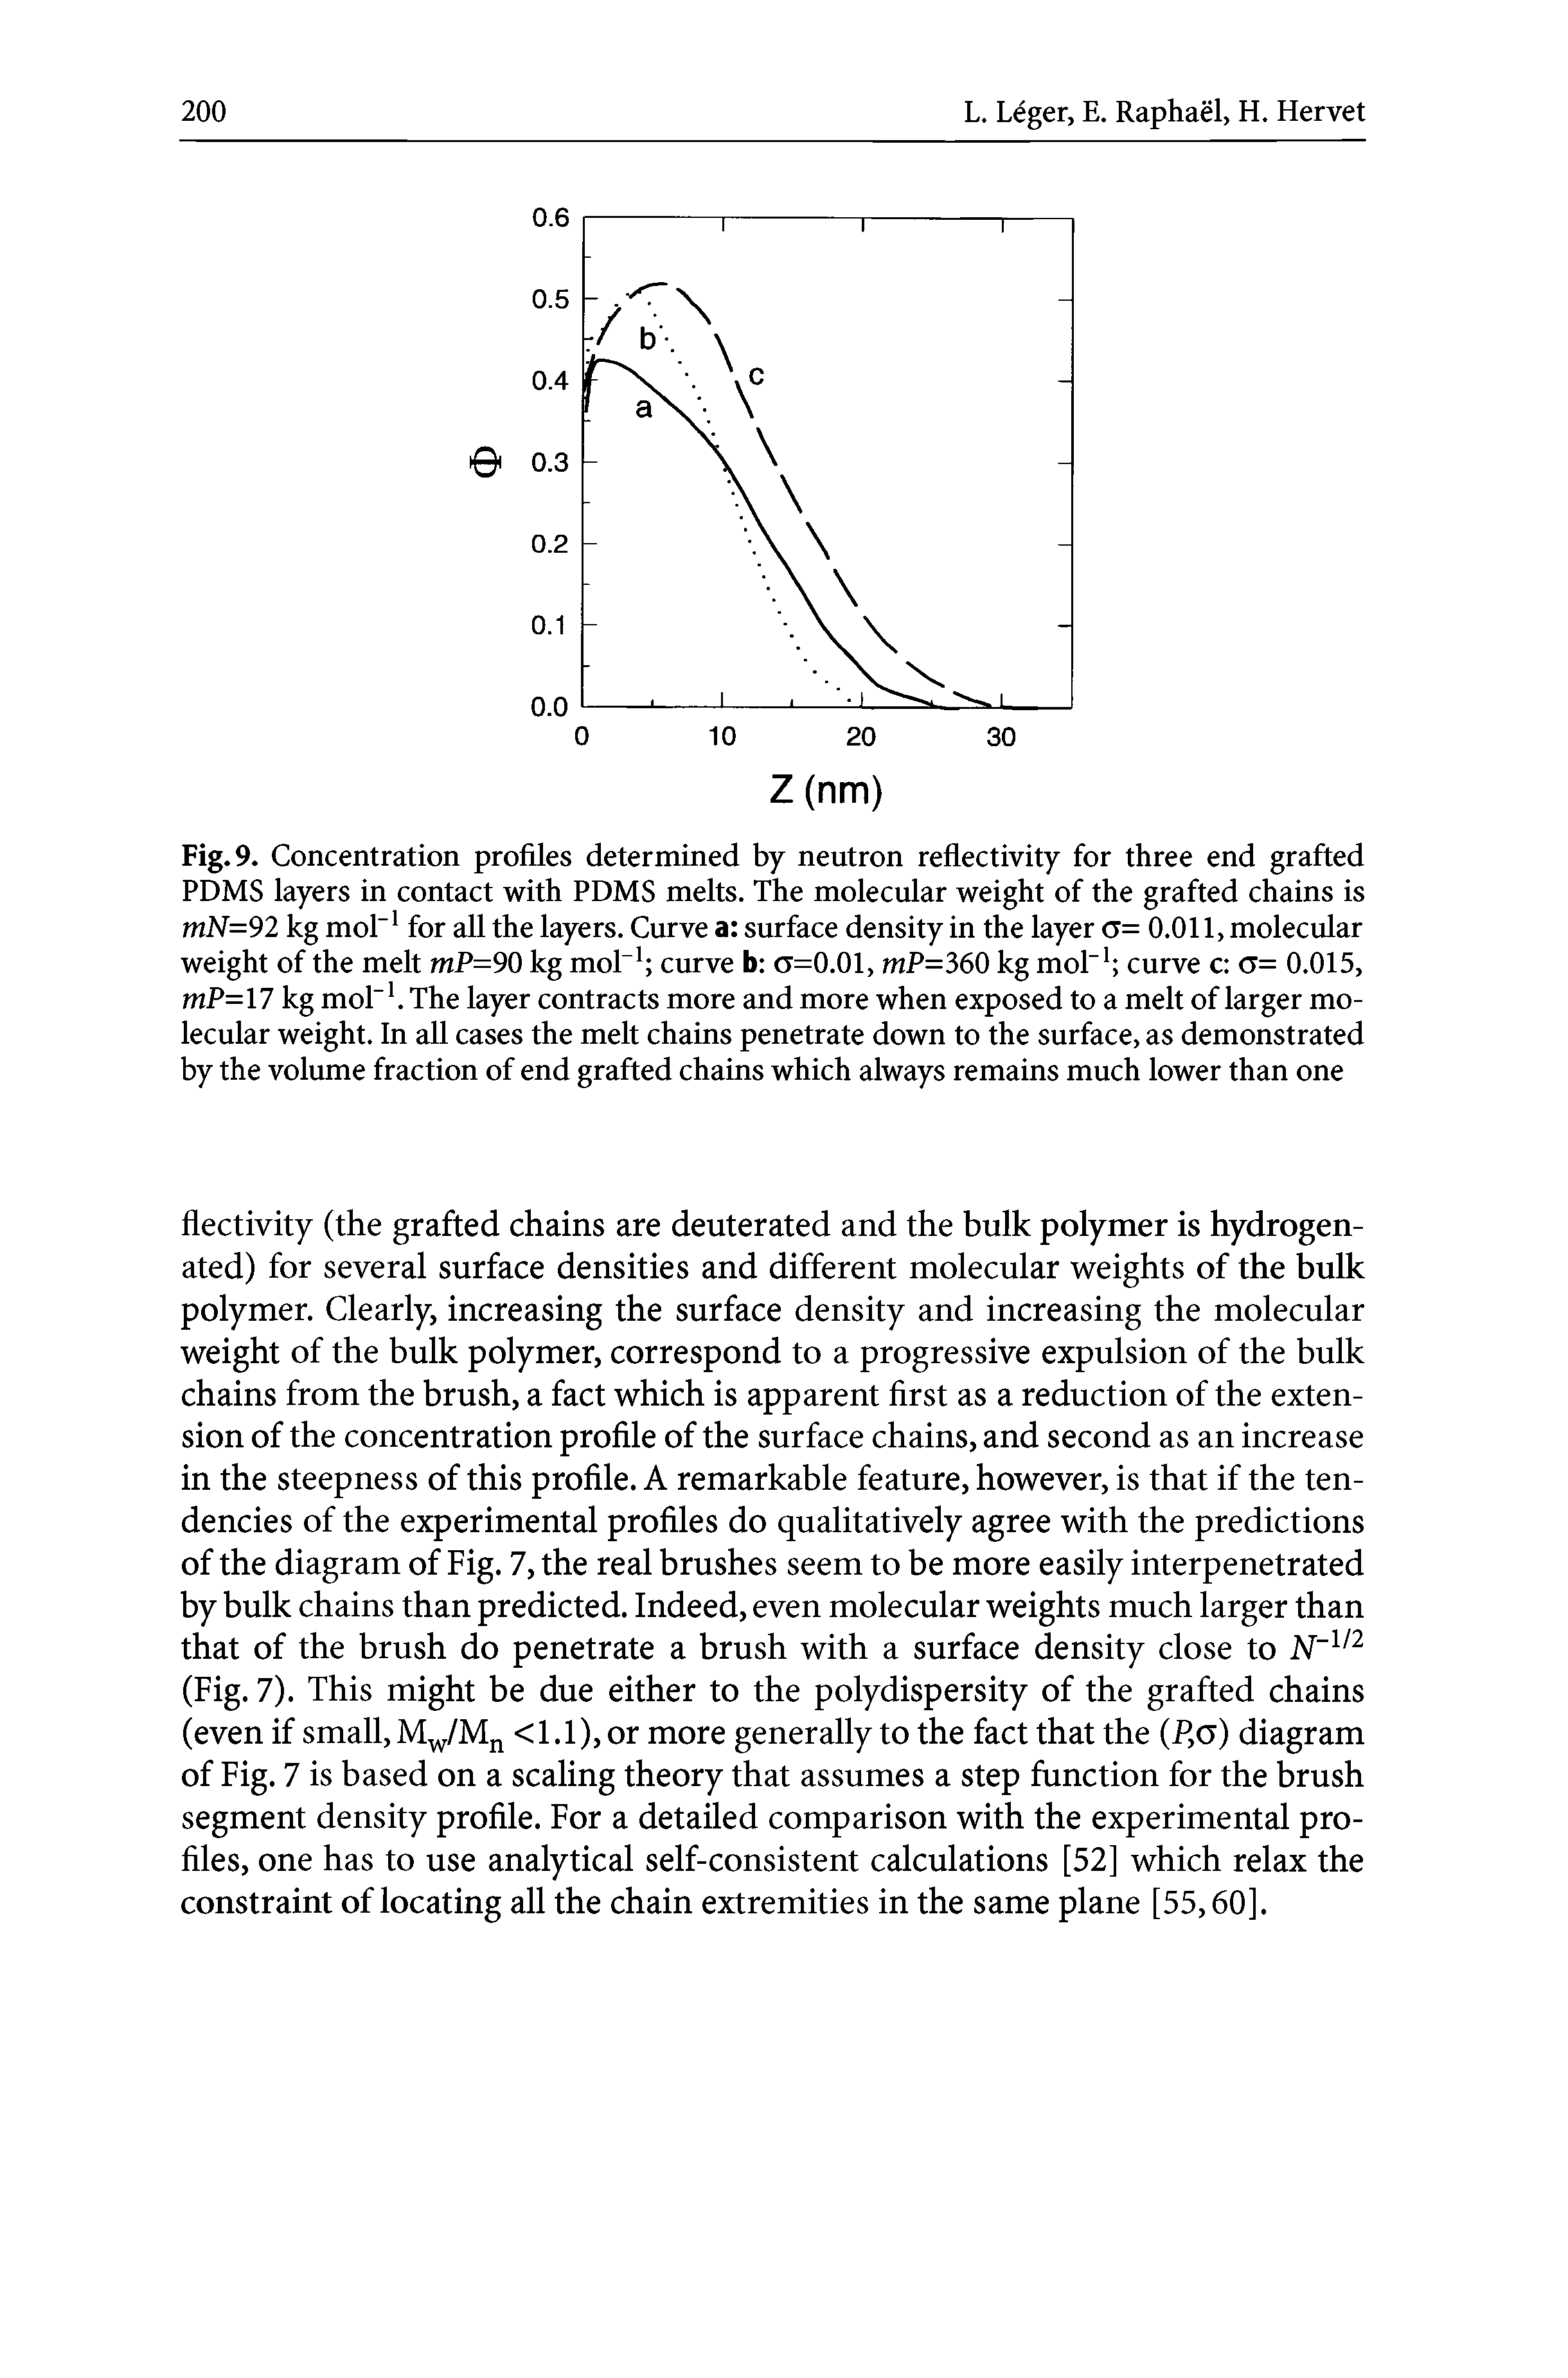 Fig. 9. Concentration profiles determined by neutron reflectivity for three end grafted PDMS layers in contact with PDMS melts. The molecular weight of the grafted chains is mN= 92 kg mol-1 for all the layers. Curve a surface density in the layer o= 0.011, molecular weight of the melt mP=90 kg mol-1 curve b o=0.01, mP=360 kg mol-1 curve c o= 0.015, mP= 17 kg mol-1. The layer contracts more and more when exposed to a melt of larger molecular weight. In all cases the melt chains penetrate down to the surface, as demonstrated by the volume fraction of end grafted chains which always remains much lower than one...